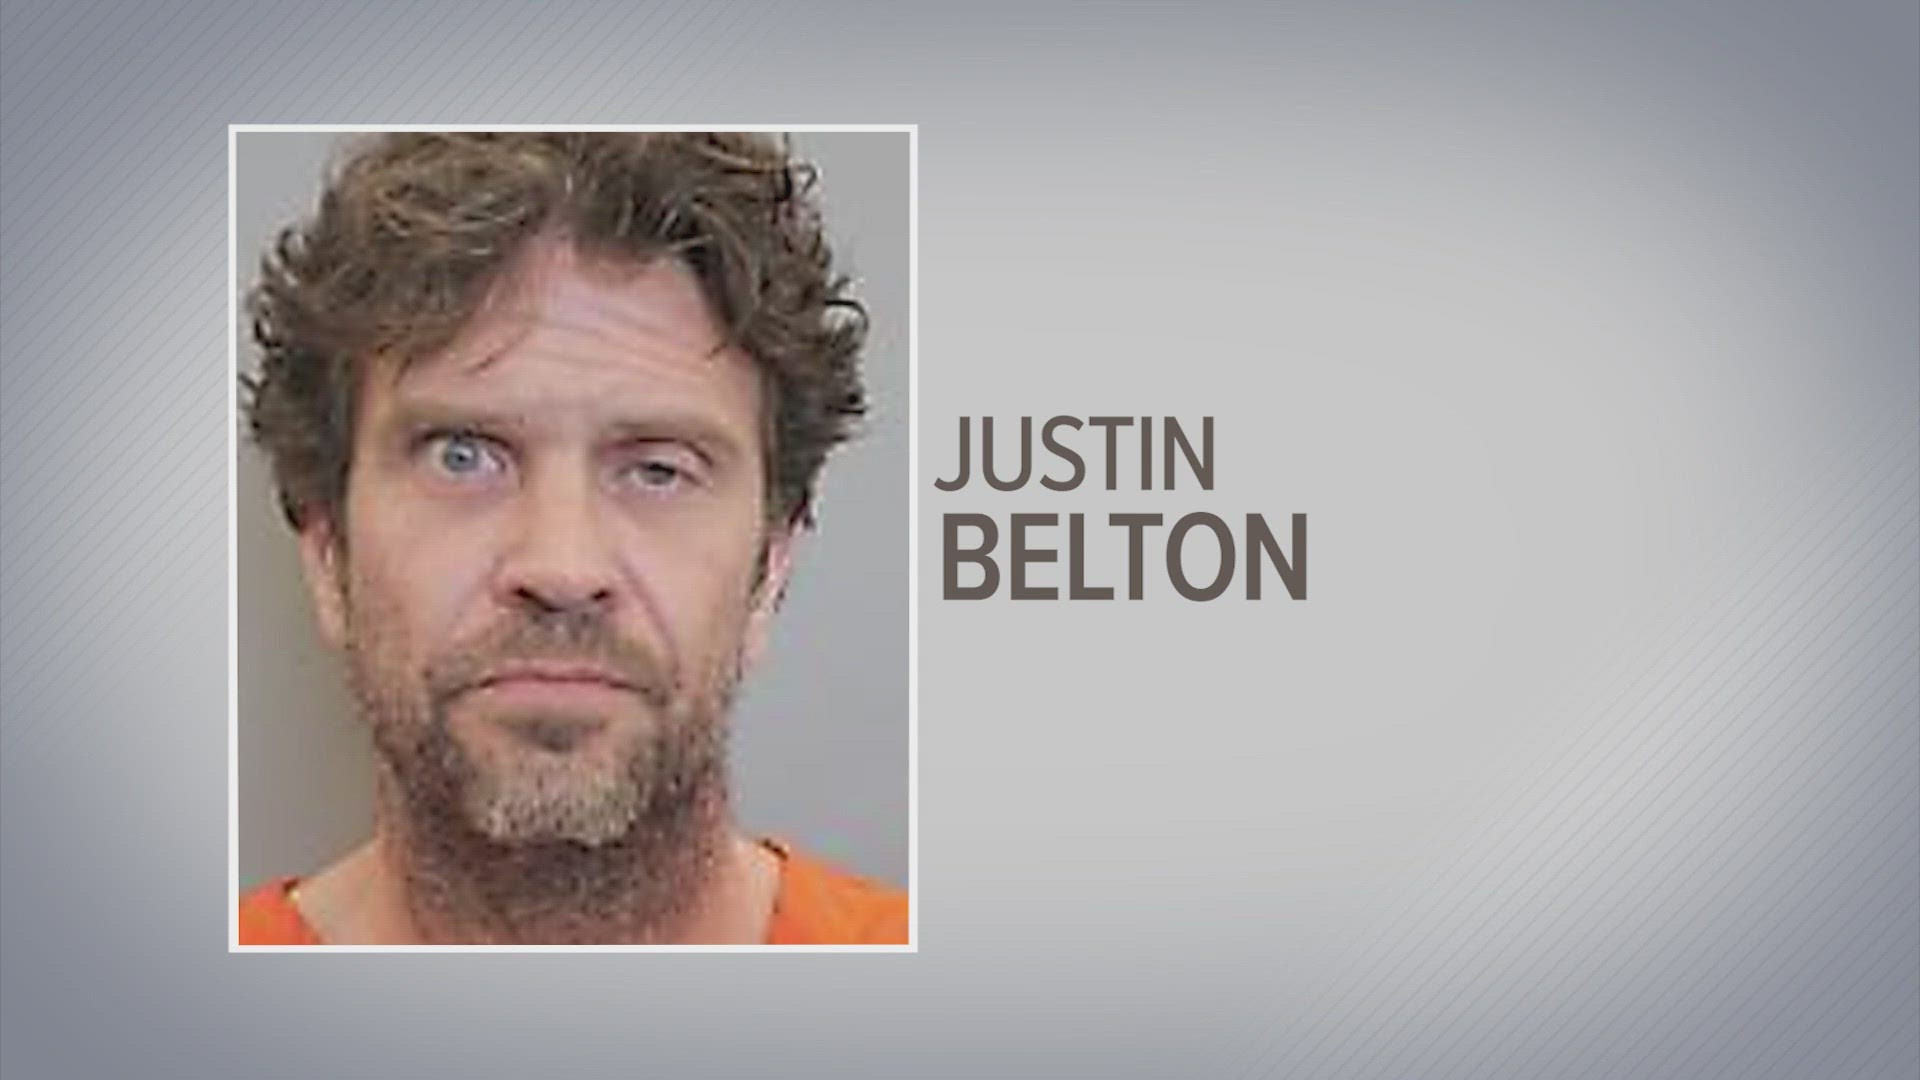 Justin Reilly Belton, 44, is charged with four counts of cruelty to animals.